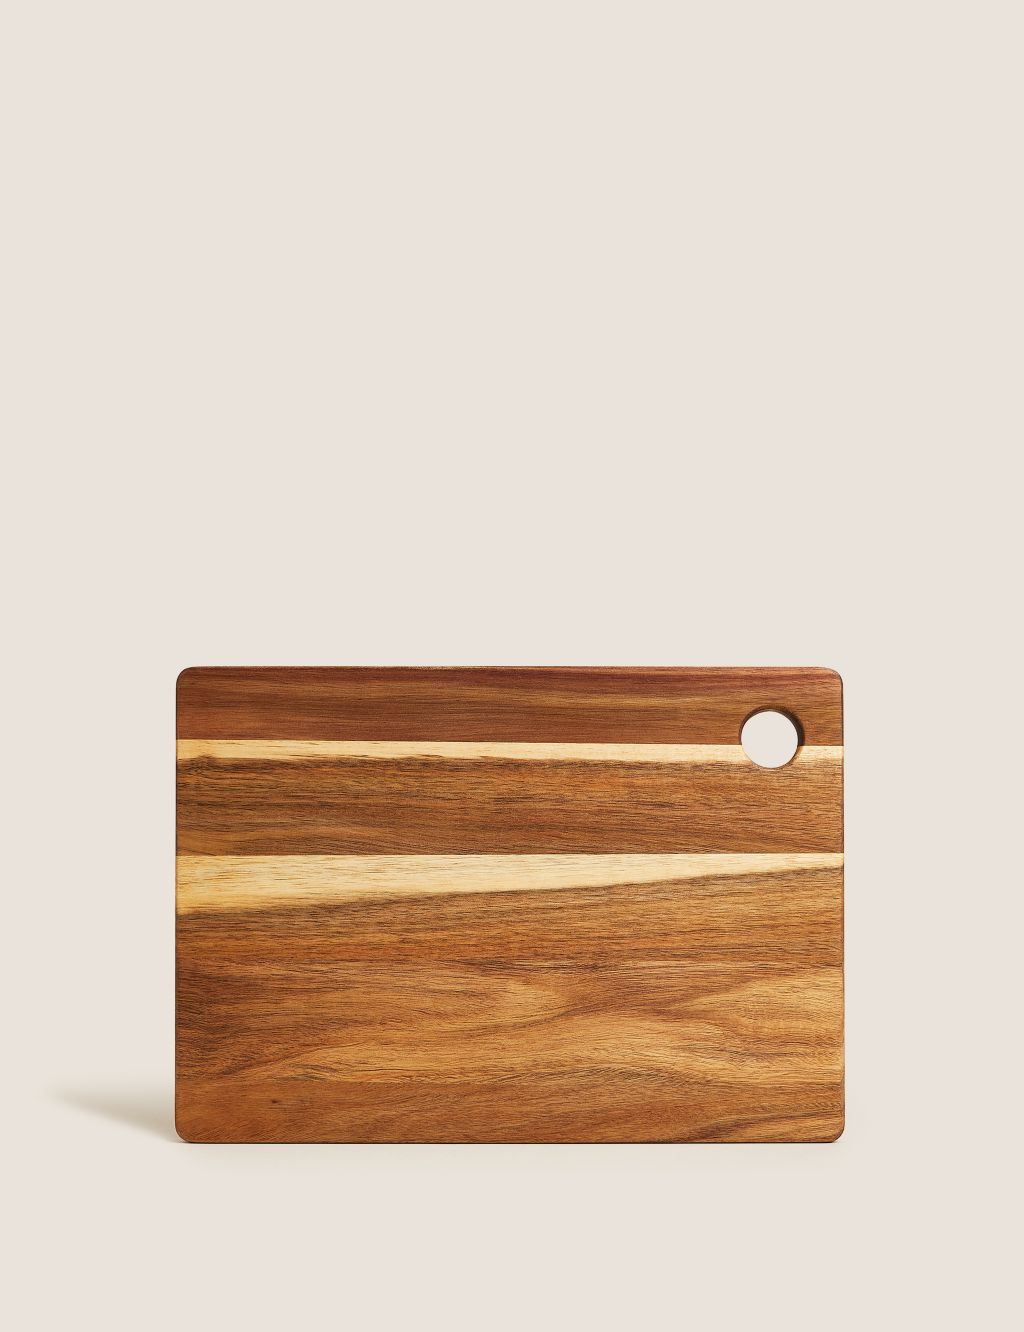 Large Wooden Chopping Board image 1